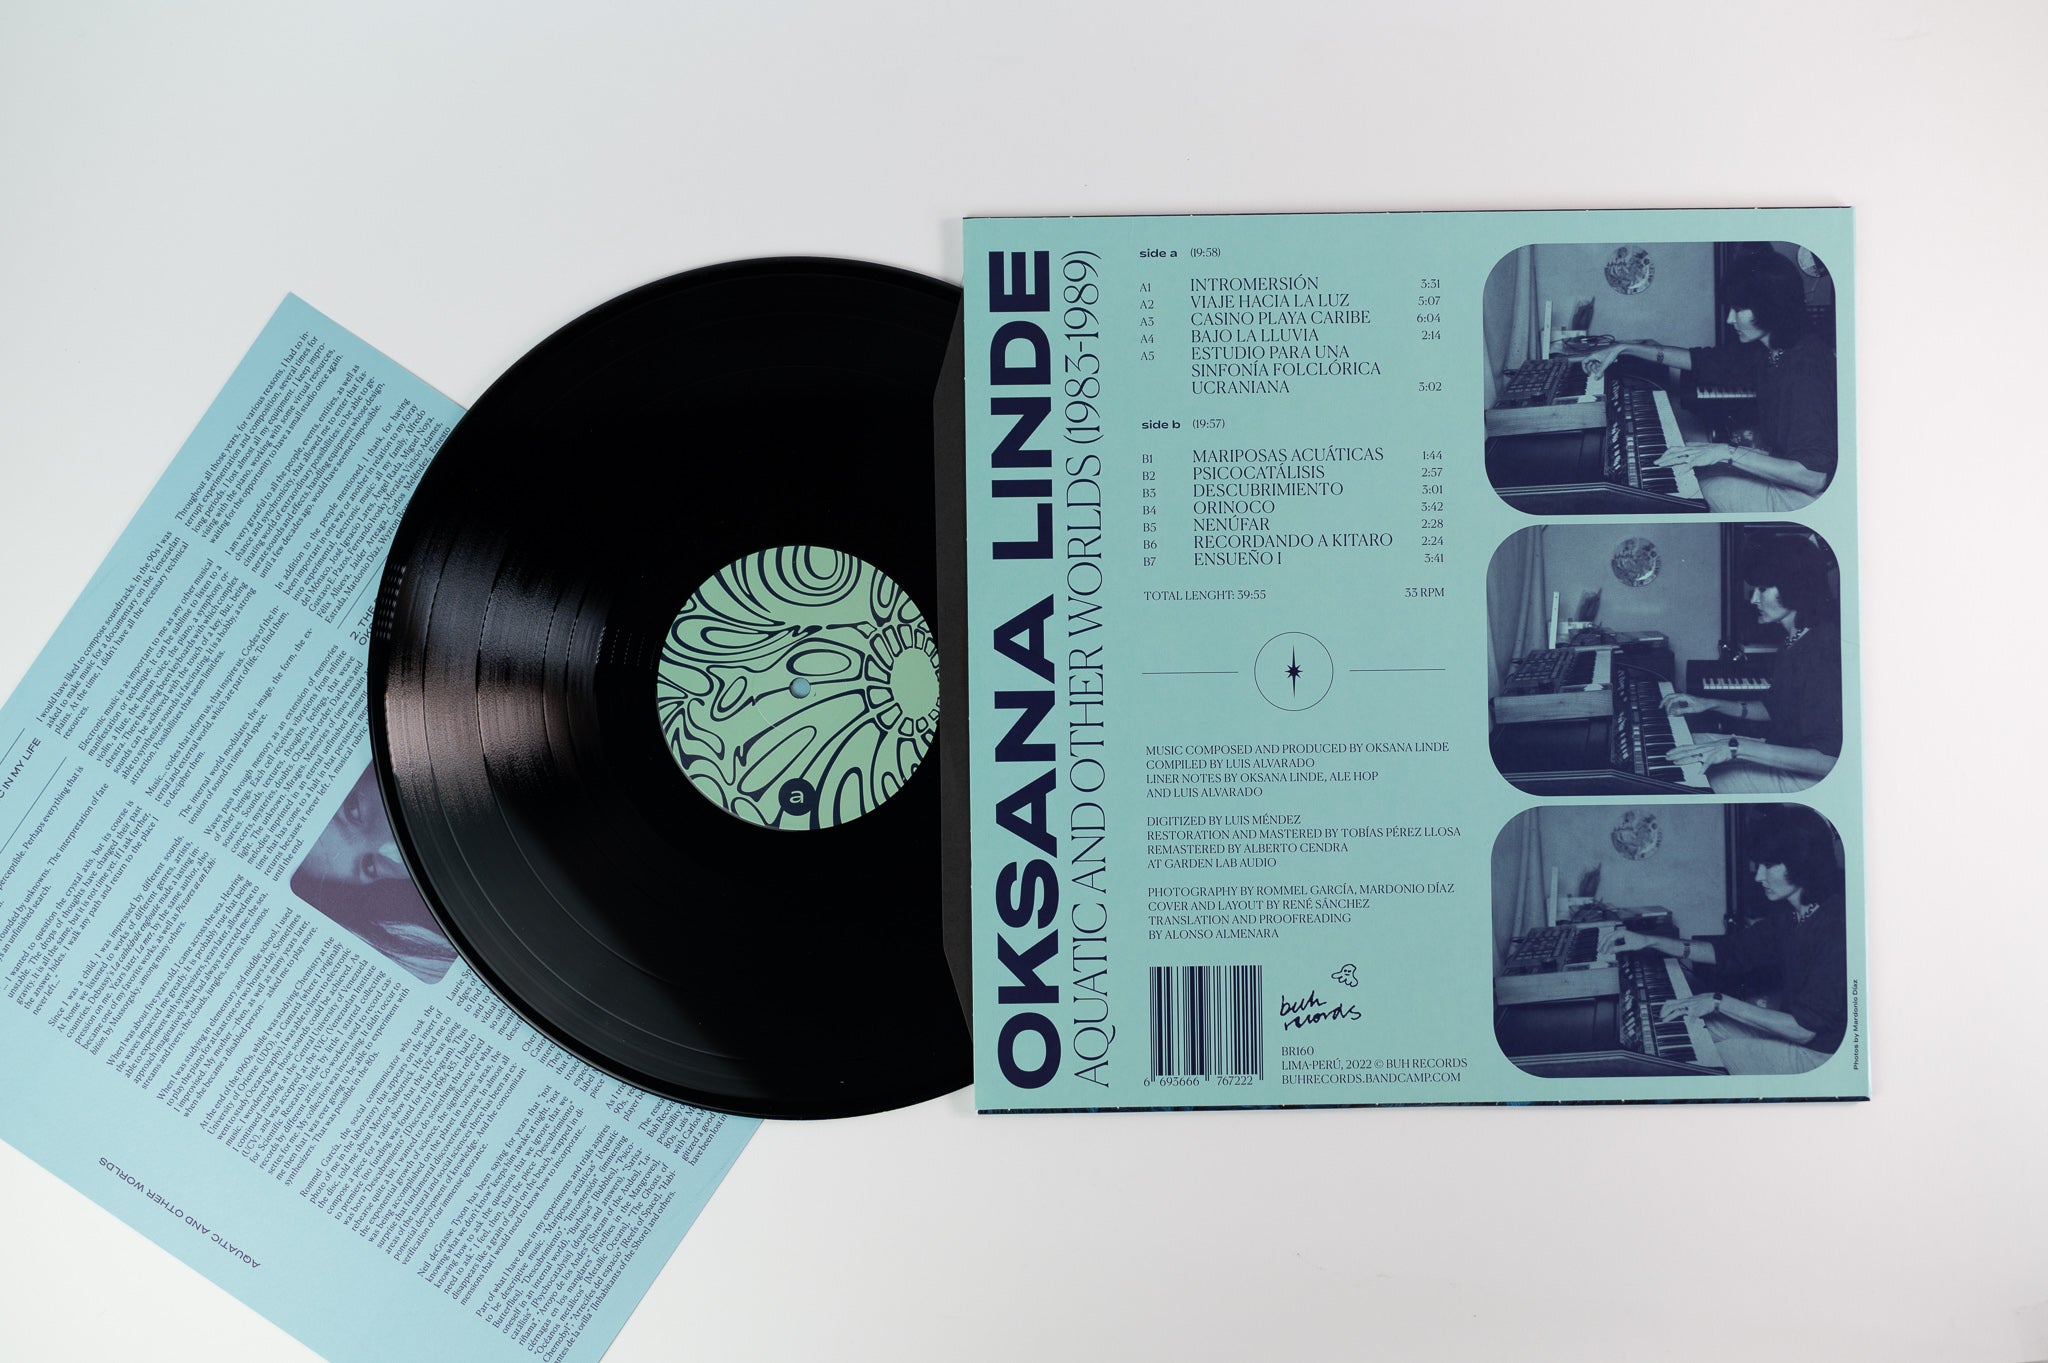 Oksana Linde - Aquatic And Other Worlds (1983-1989) on Buh Reissue